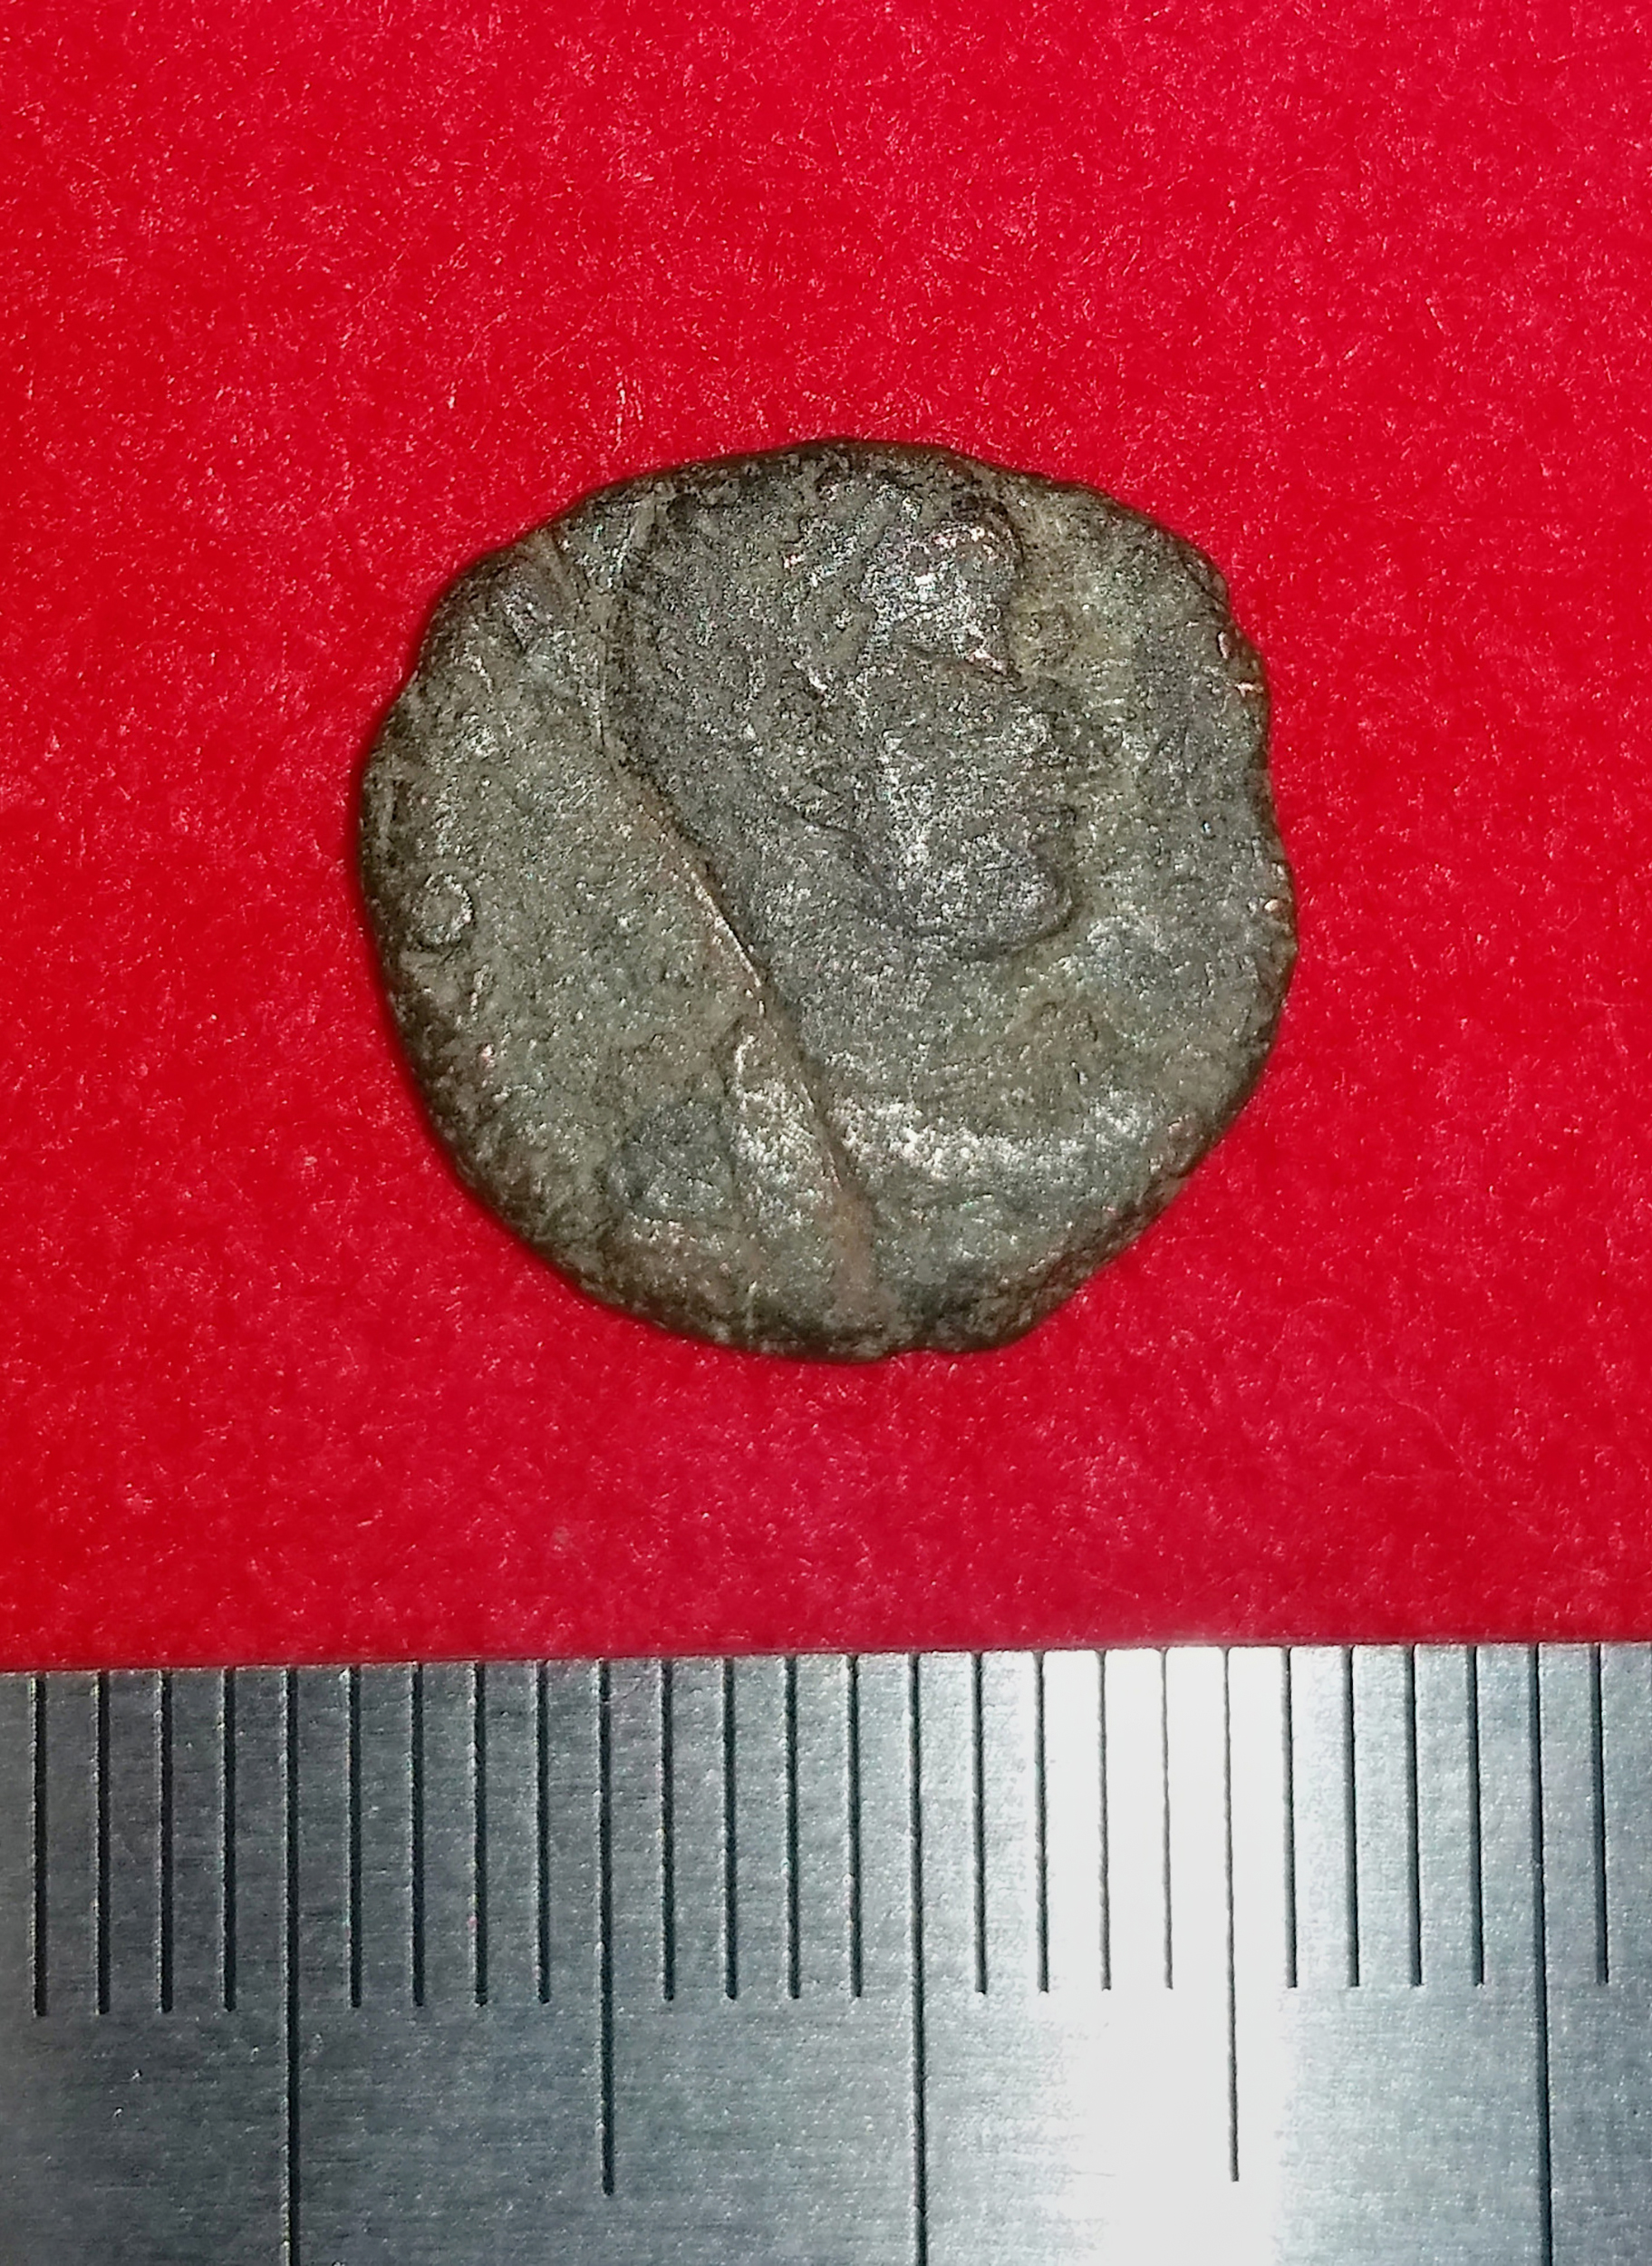 This handout photo released on September 26, 2016 by the Uruma city municipal office and received via Jiji Press on September 28 shows a 4th-century copper coin from ancient Rome after it was unearthed in Japan's Okinawa island together with other coins. Japanese archaeologists said on September 28 they have for the first time unearthed ancient Roman coins at the ruins of an old castle. The discovery of 10 bronze and copper coins -- the oldest dating from about 300-400 AD -- in southern Okinawa caught researchers by surprise. A team of researchers have been excavating Katsuren castle in Uruma, which is a UNESCO world heritage site, since 2013. / AFP PHOTO / JIJI PRESS / JIJI PRESS / Japan OUT